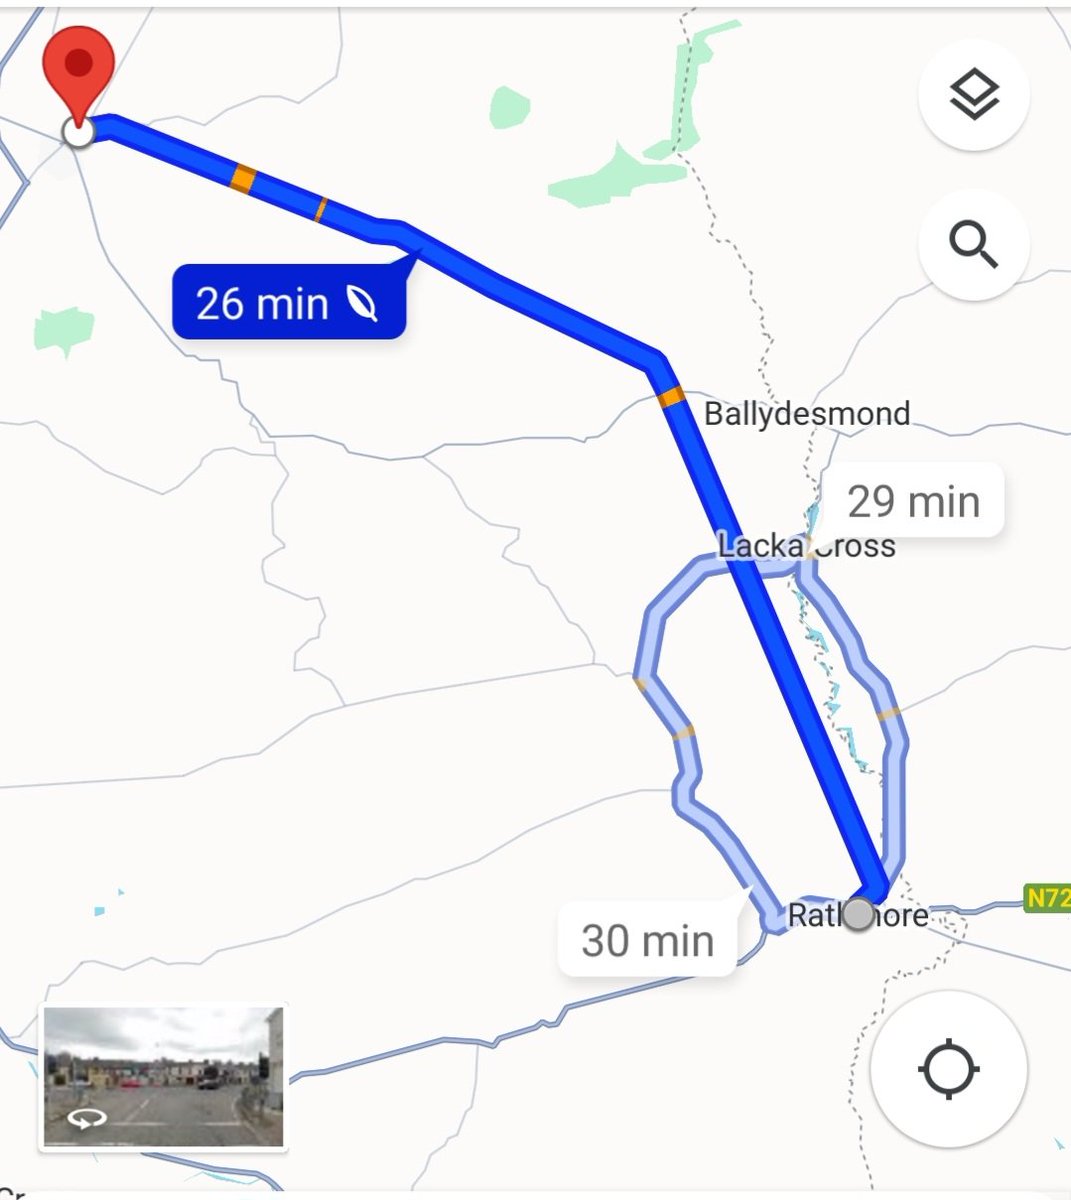 Rathmore to Castleisland.
Straightest road in rural Ireland?
1 gentle turn & straight on again.
Proper back road. 
26km in length. 
Like driving in Saudi Arabia.
But in forestry, not desert.

Thoughts @colmoregan?